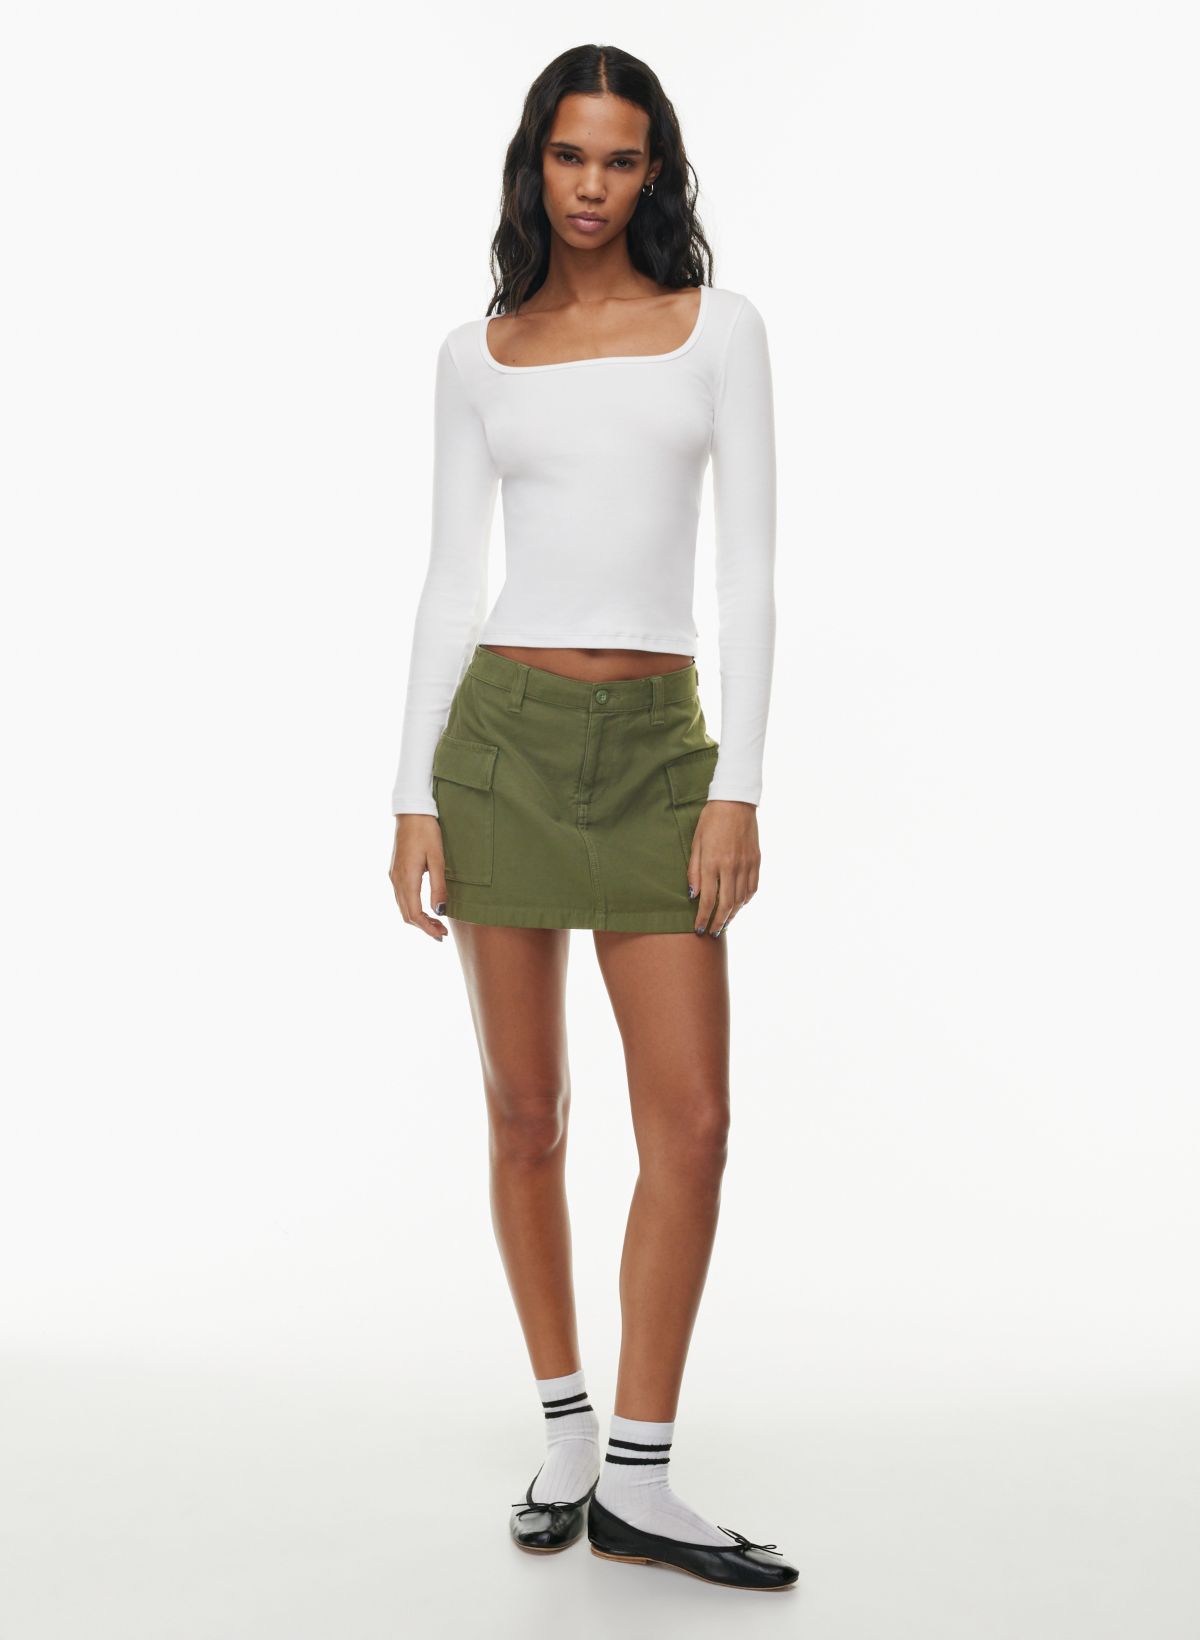 The Army Green Boat Neck Sheer Knit Top - Green Knit Long Sleeve